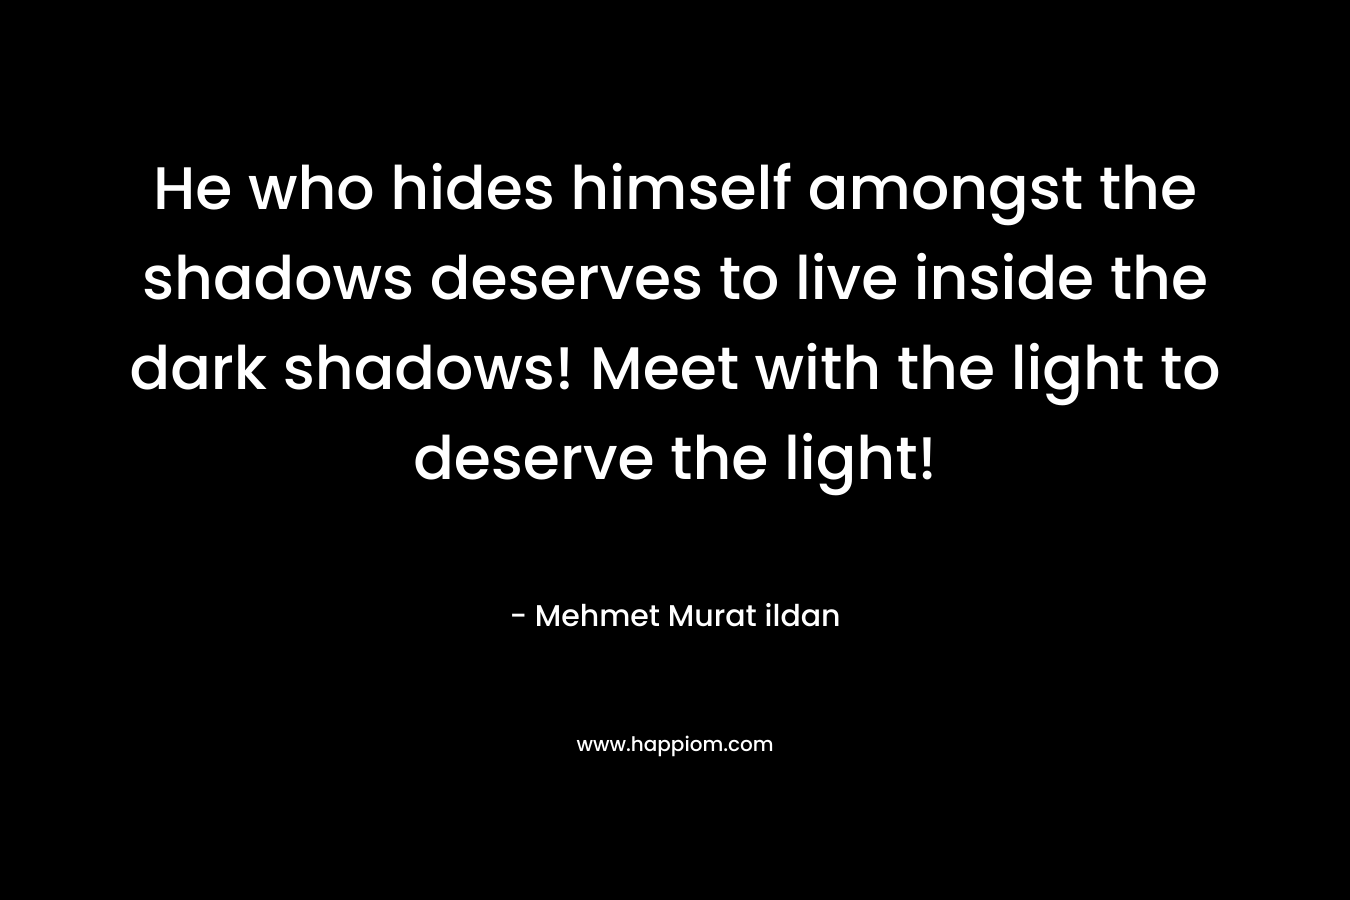 He who hides himself amongst the shadows deserves to live inside the dark shadows! Meet with the light to deserve the light!